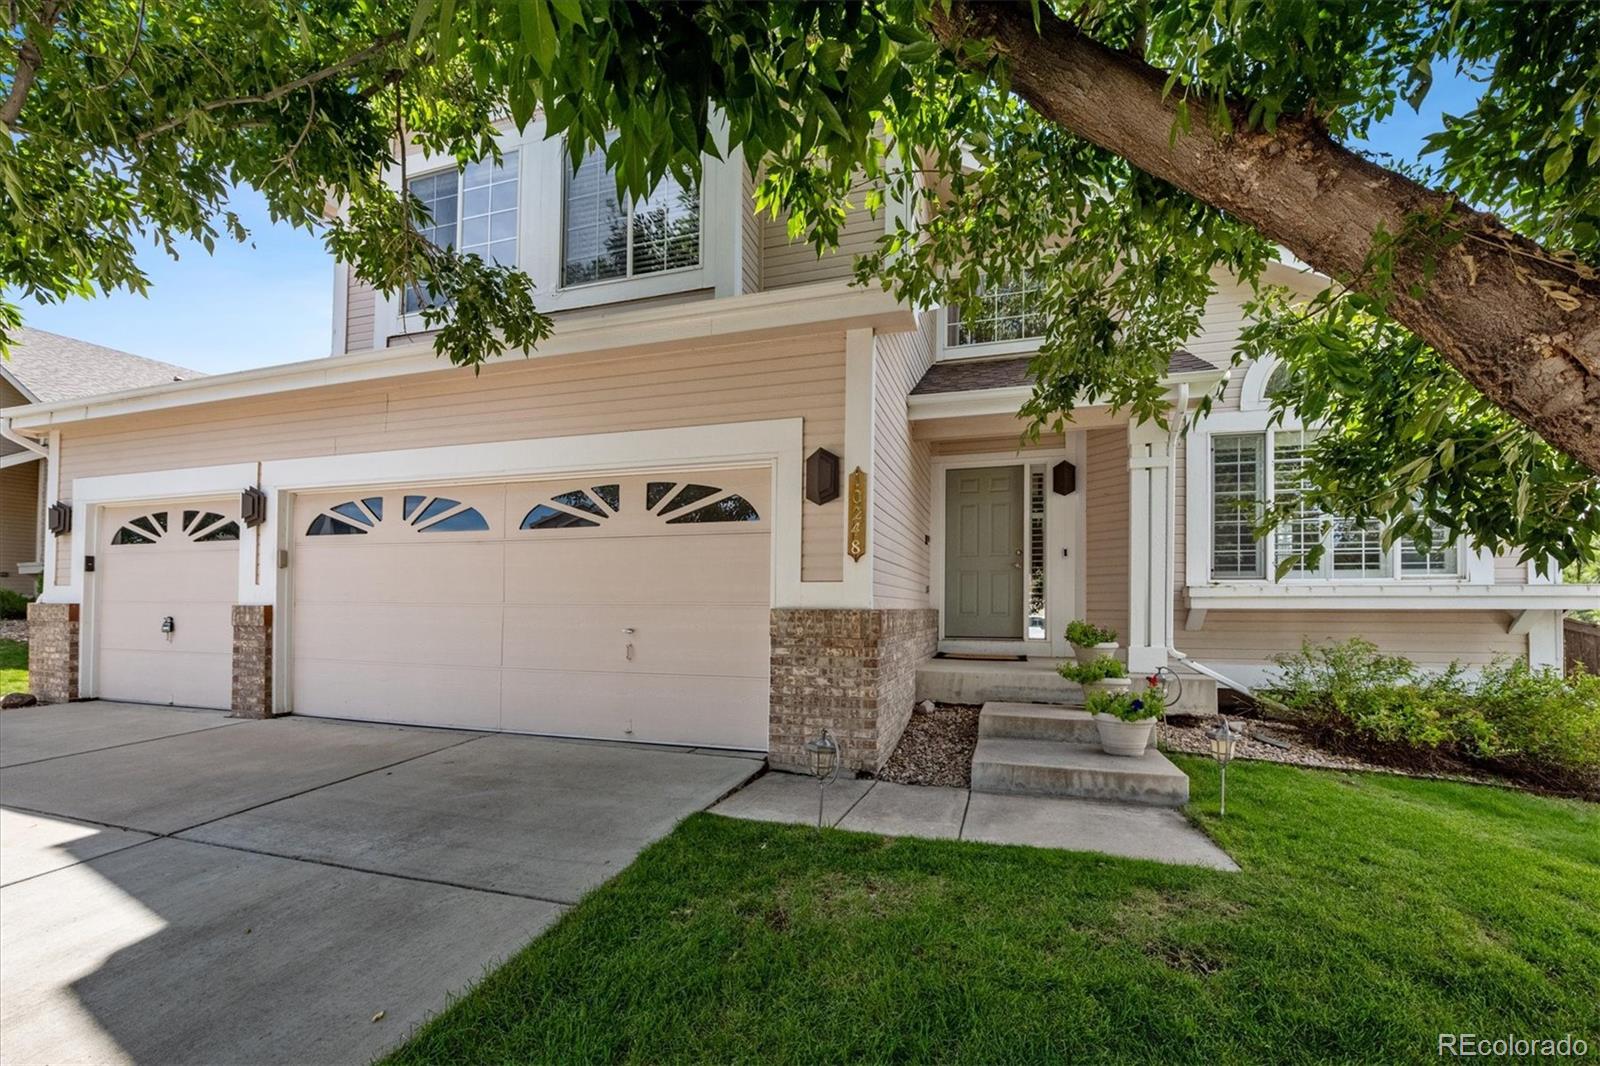 10248  hexton court, Lone Tree sold home. Closed on 2023-12-14 for $685,326.